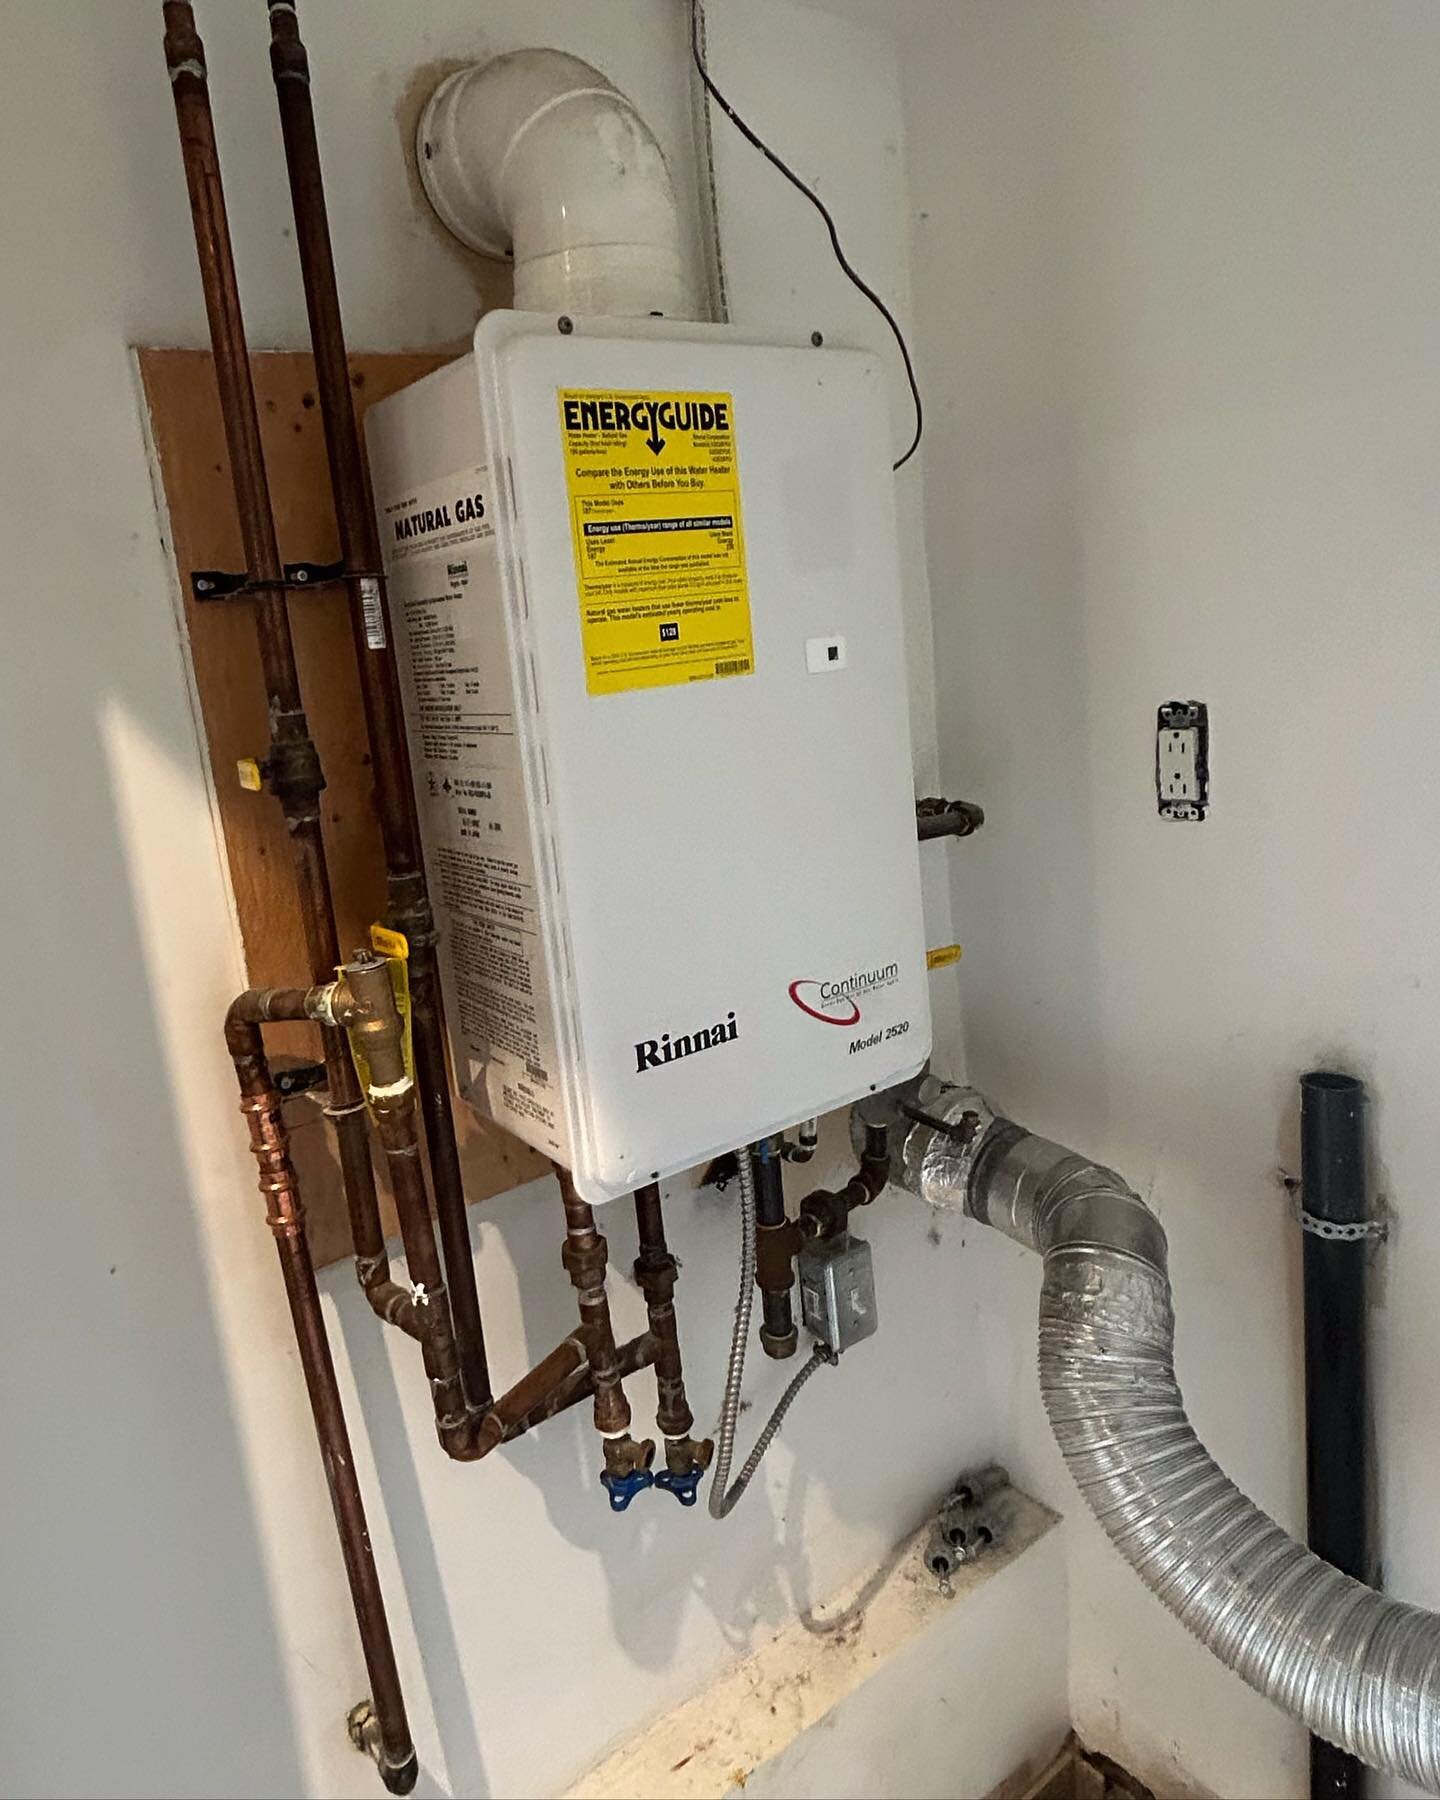 Before &amp; After 👌🏼✨

Tankless water heaters have been around for about 25 years, and we&rsquo;re now starting to see the first generation of units fail. Our staff are highly experienced when it comes to replacing older models with the newest and